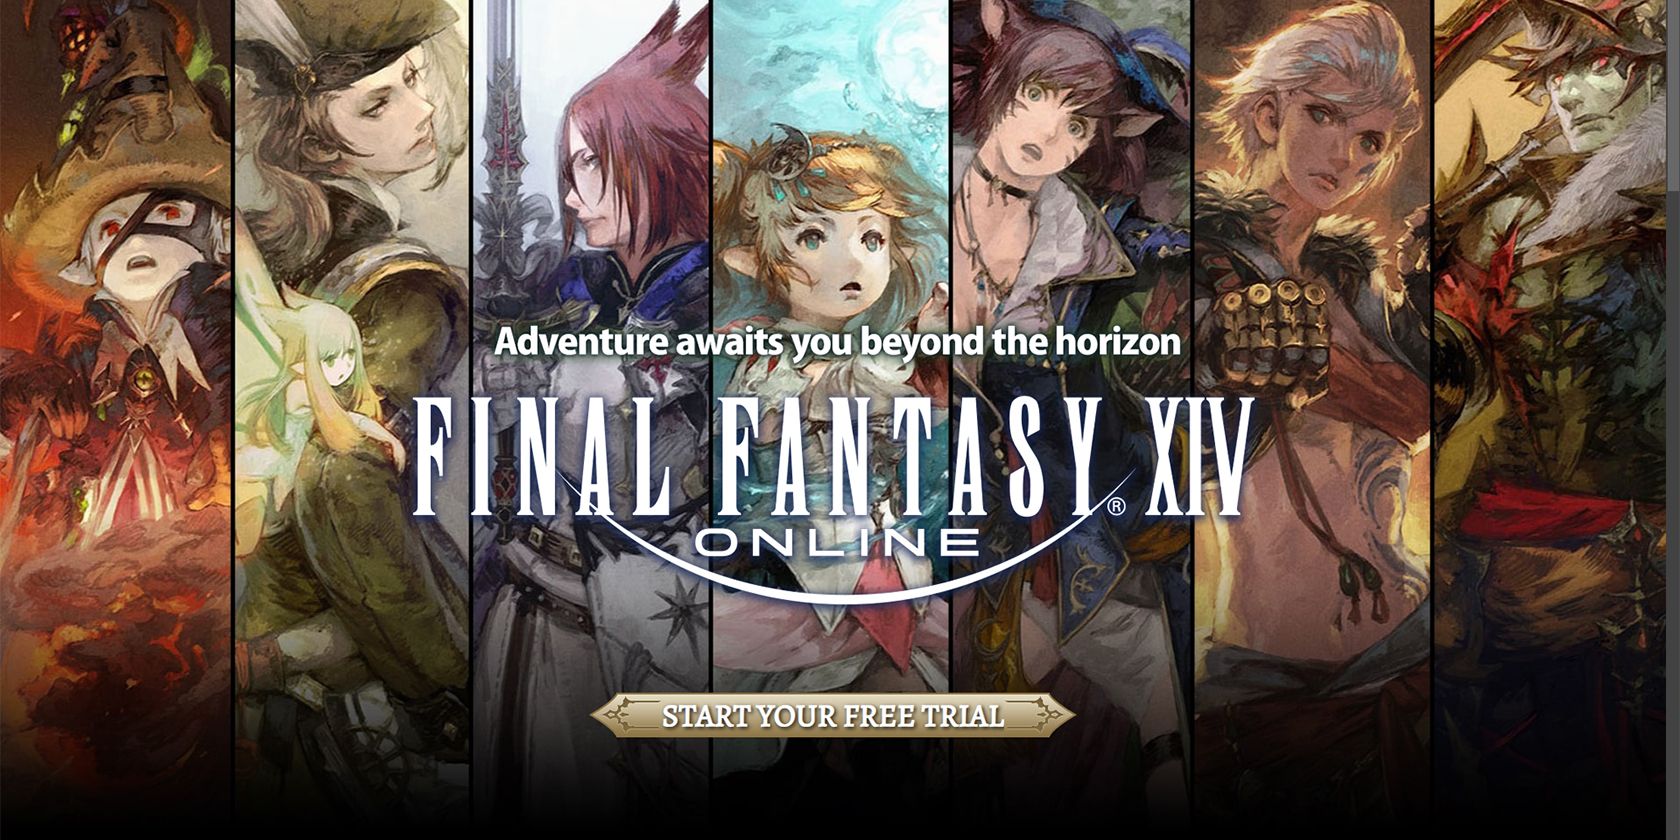 how to install final fantasy xiv online demo on steam